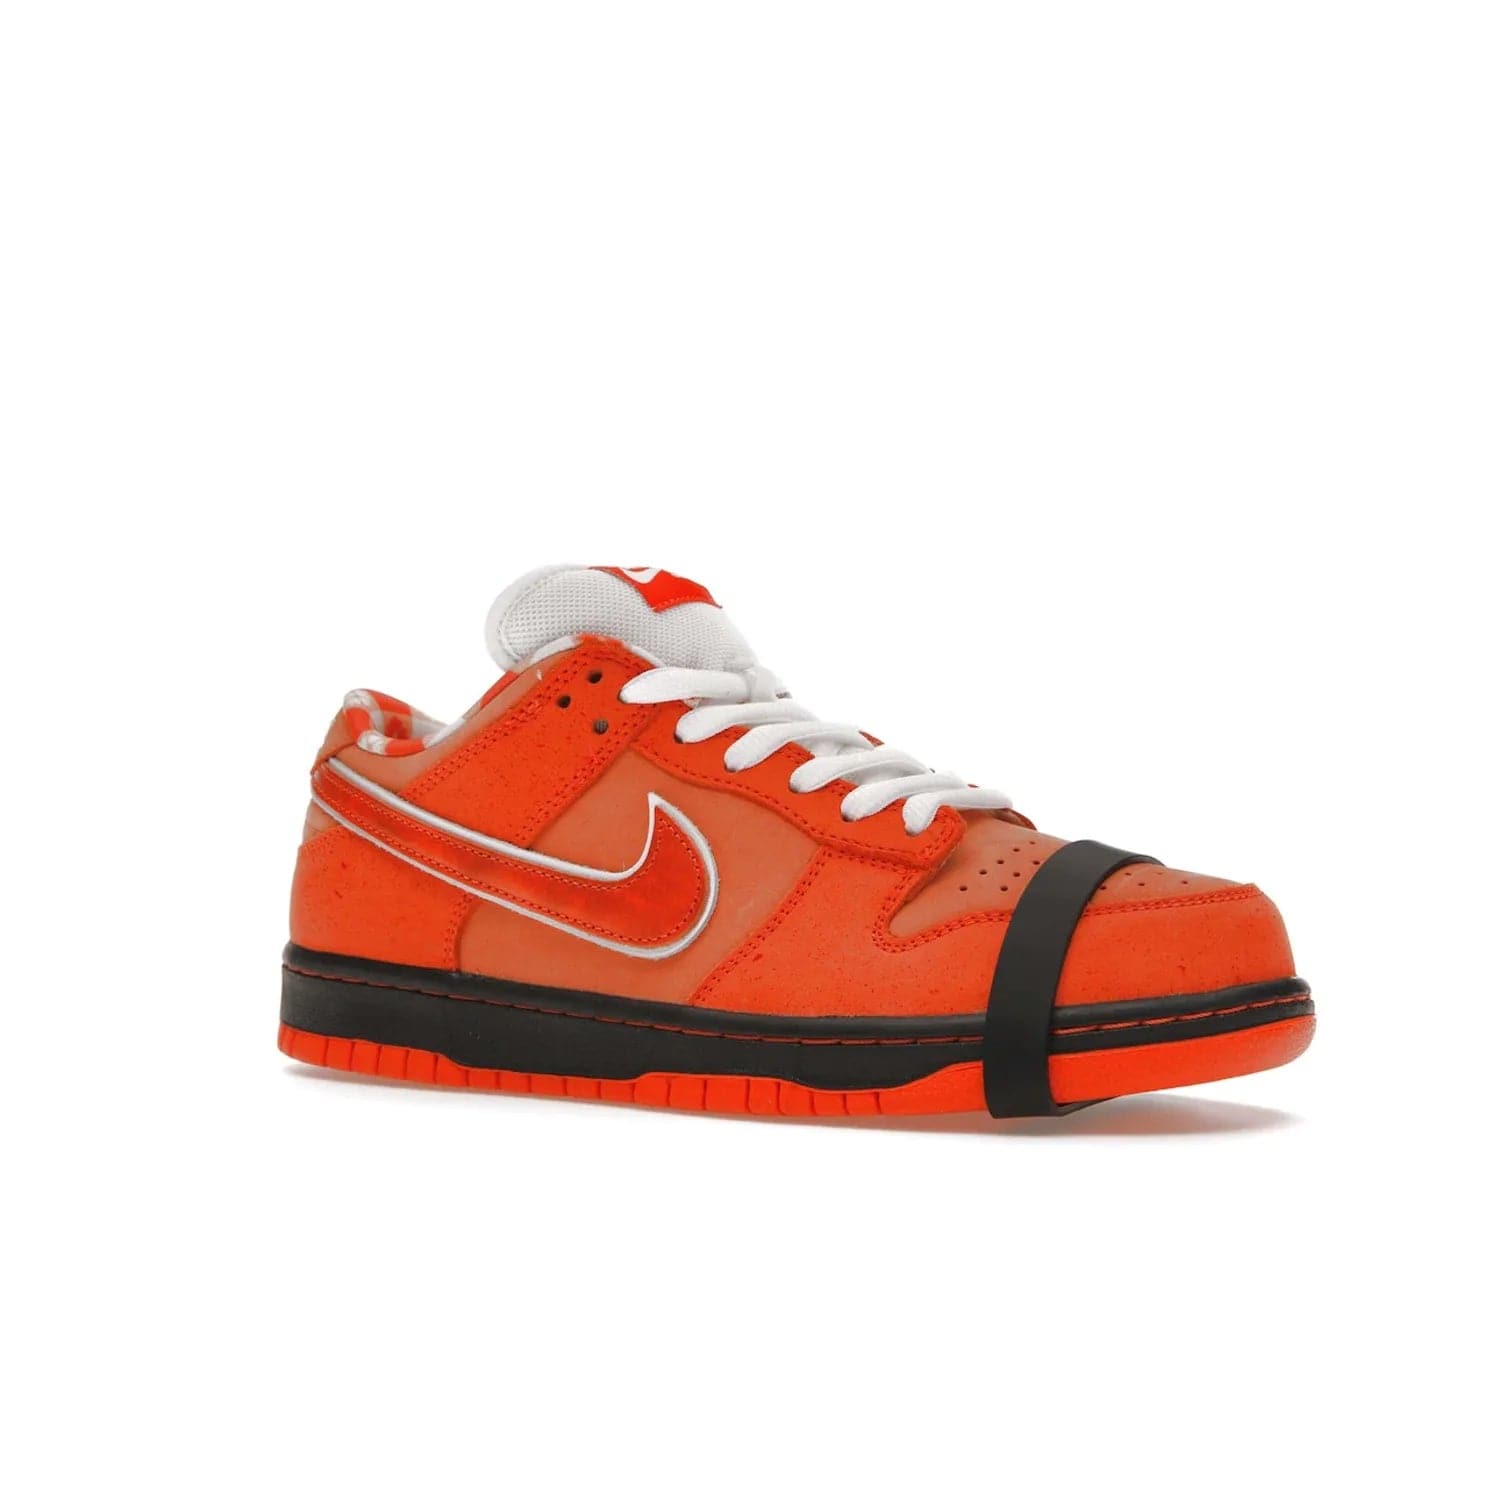 Nike SB Dunk Low Concepts Orange Lobster - Image 4 - Only at www.BallersClubKickz.com - Limited Nike SB Dunk Low Concepts Orange Lobster features premium nubuck upper with vibrant oranges for eye-catching colorblocked design. Signature Nike SB tag and bib-inspired interior for added texture. Outsole and cupsole provide extra reinforcement. Get it 12/20/2022.